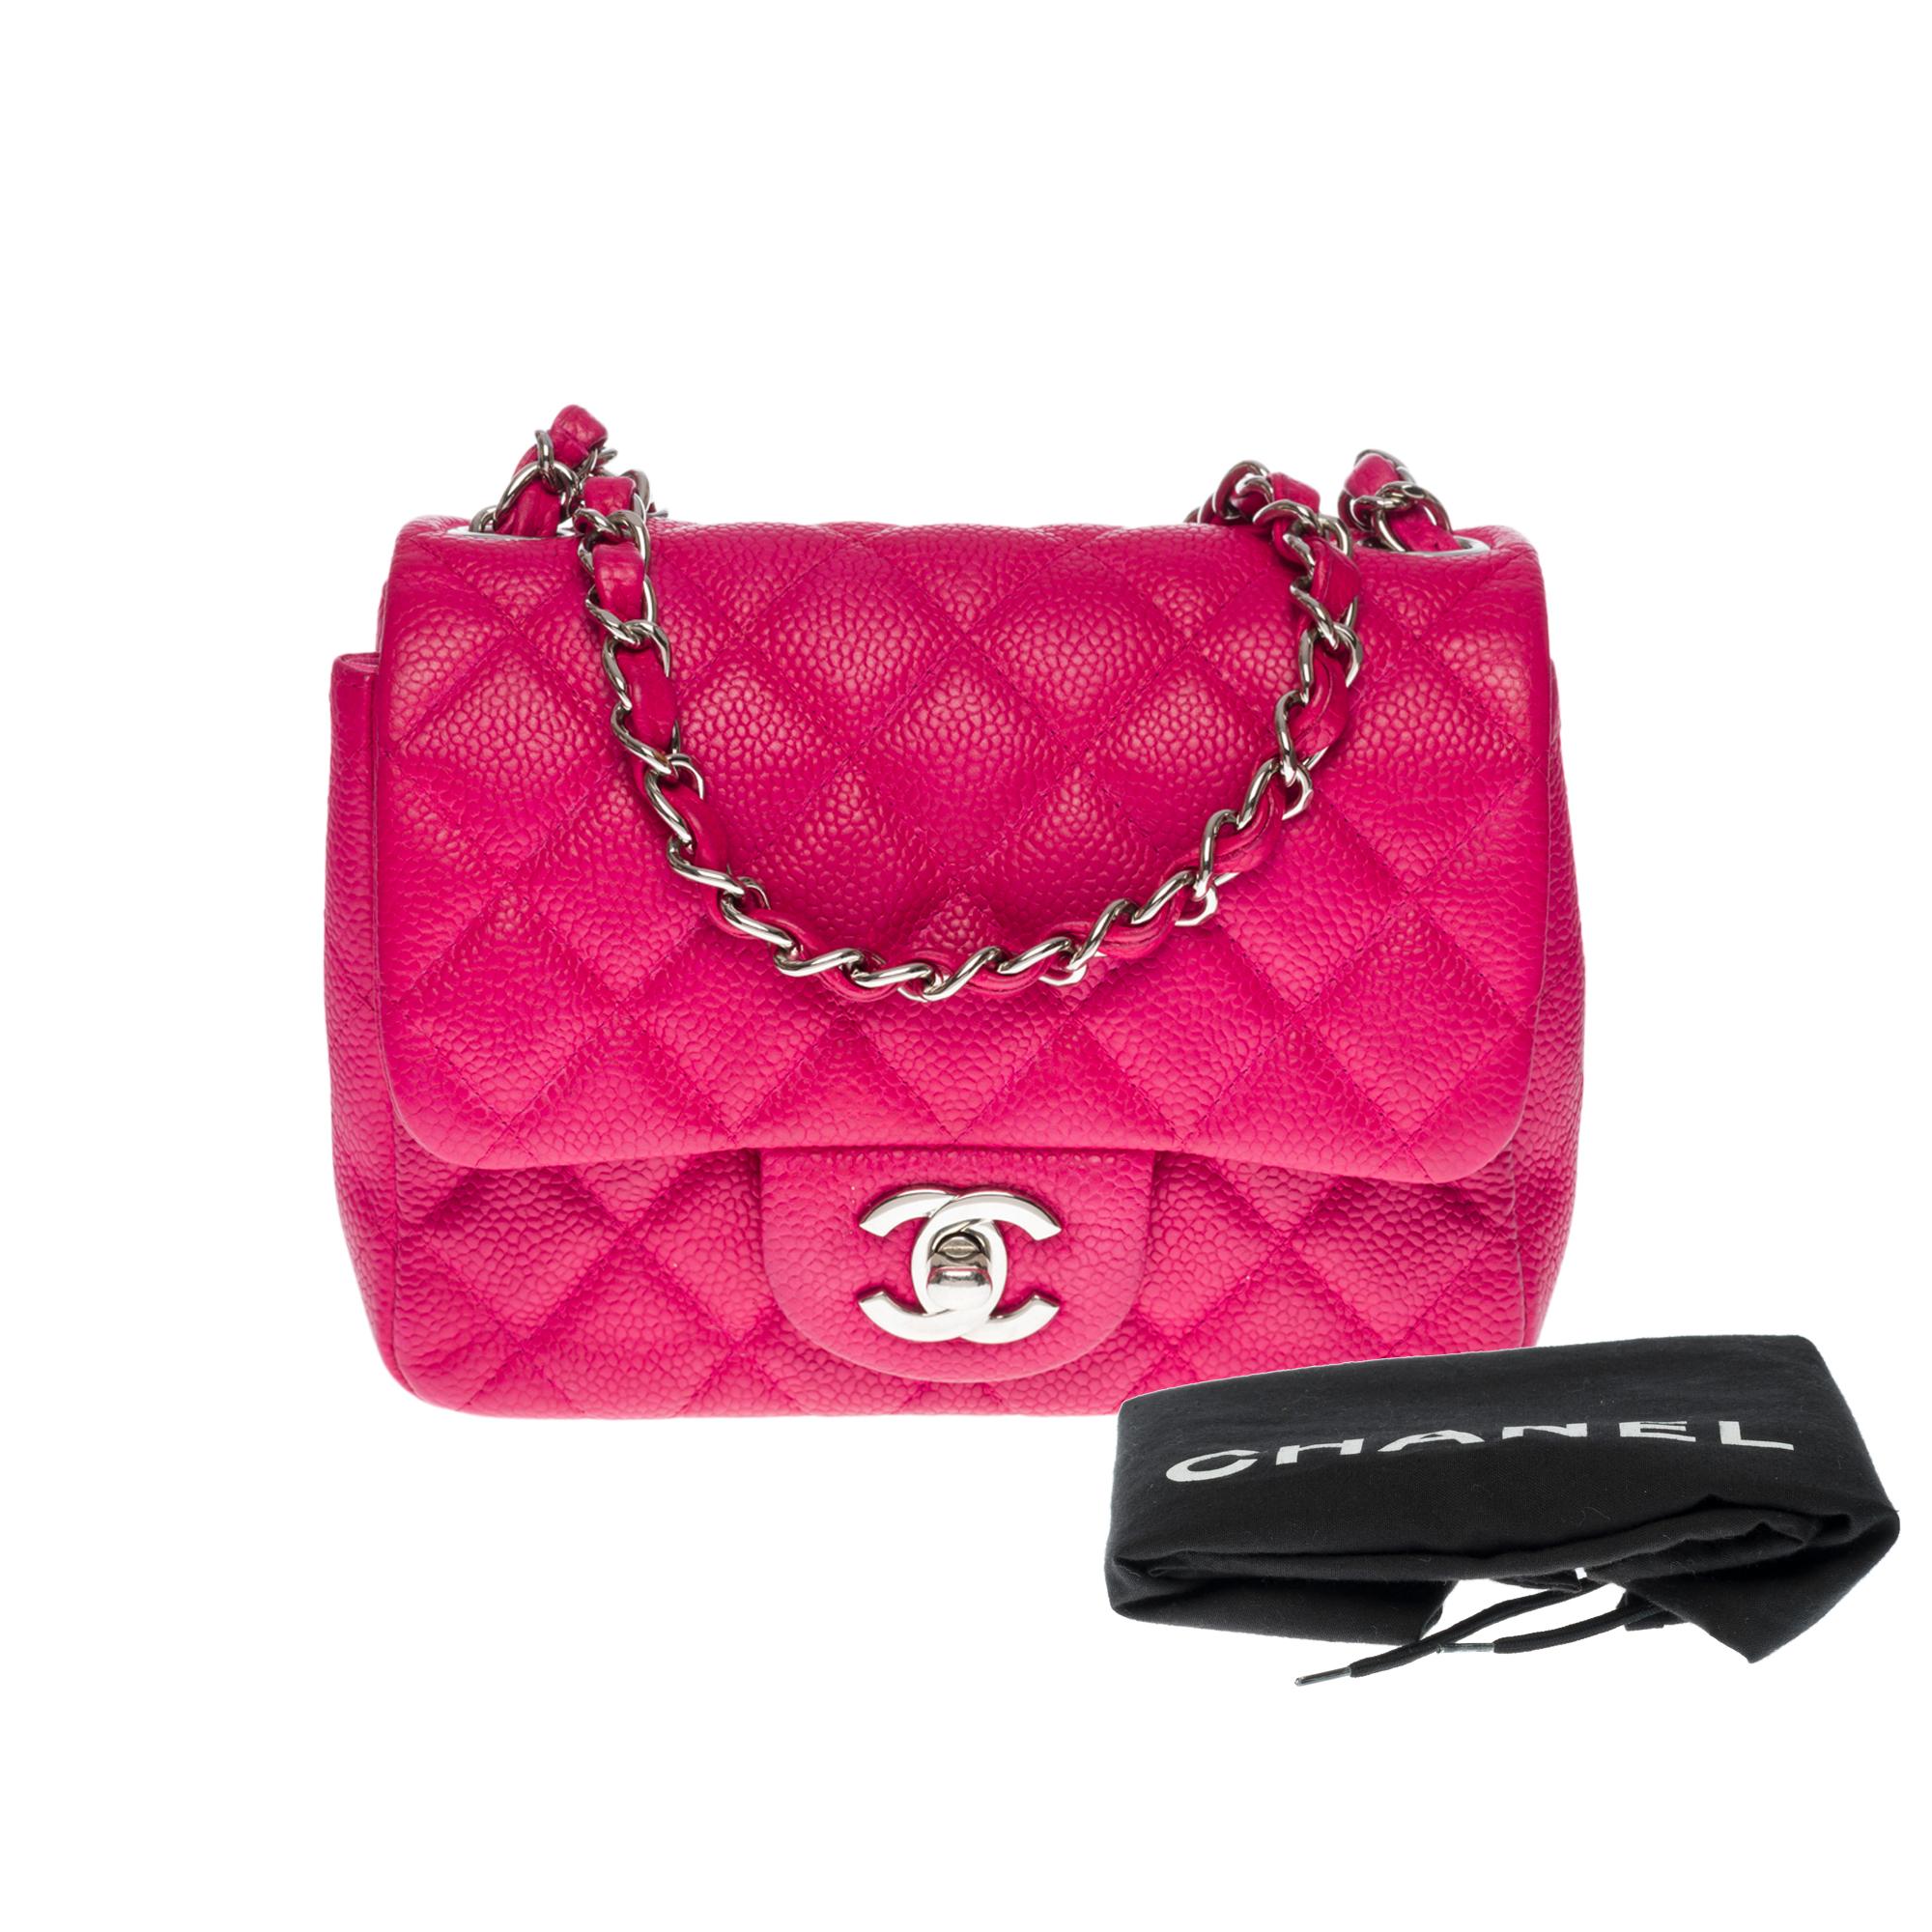 Chanel Mini Timeless Shoulder bag in Pink caviar quilted leather, SHW 6